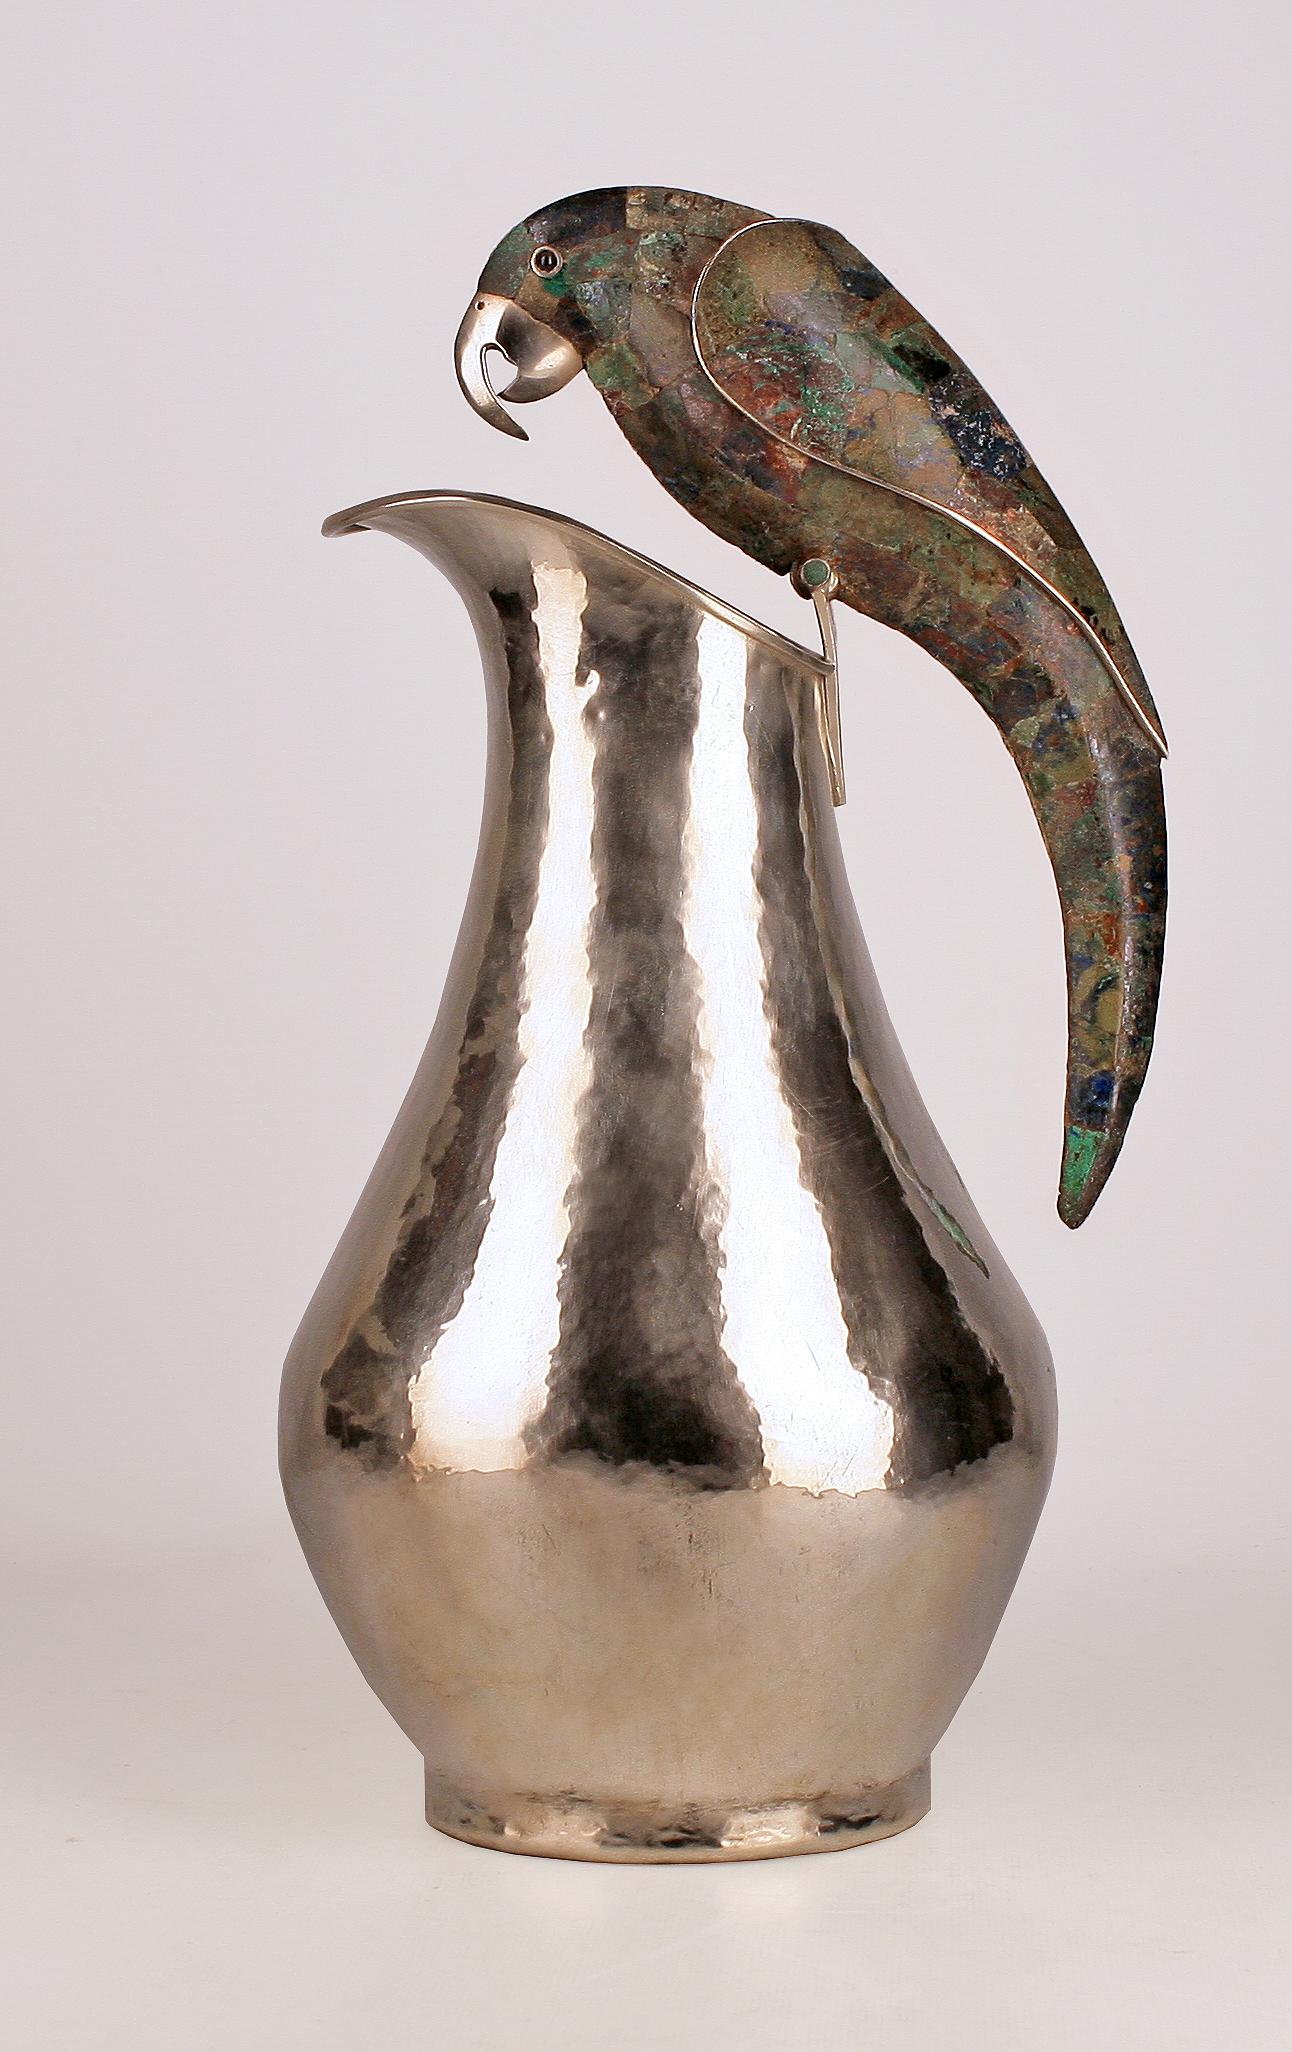 Mid-20th century mexican hand-crafted silver pitcher with crushed gemstone inlay parrot handle by Los Castillo

By: Los Castillo
Material: abalone, copper, lapis lazuli, malachite, silver, silver plate, stone
Technique: cast, hammered, hand-crafted,